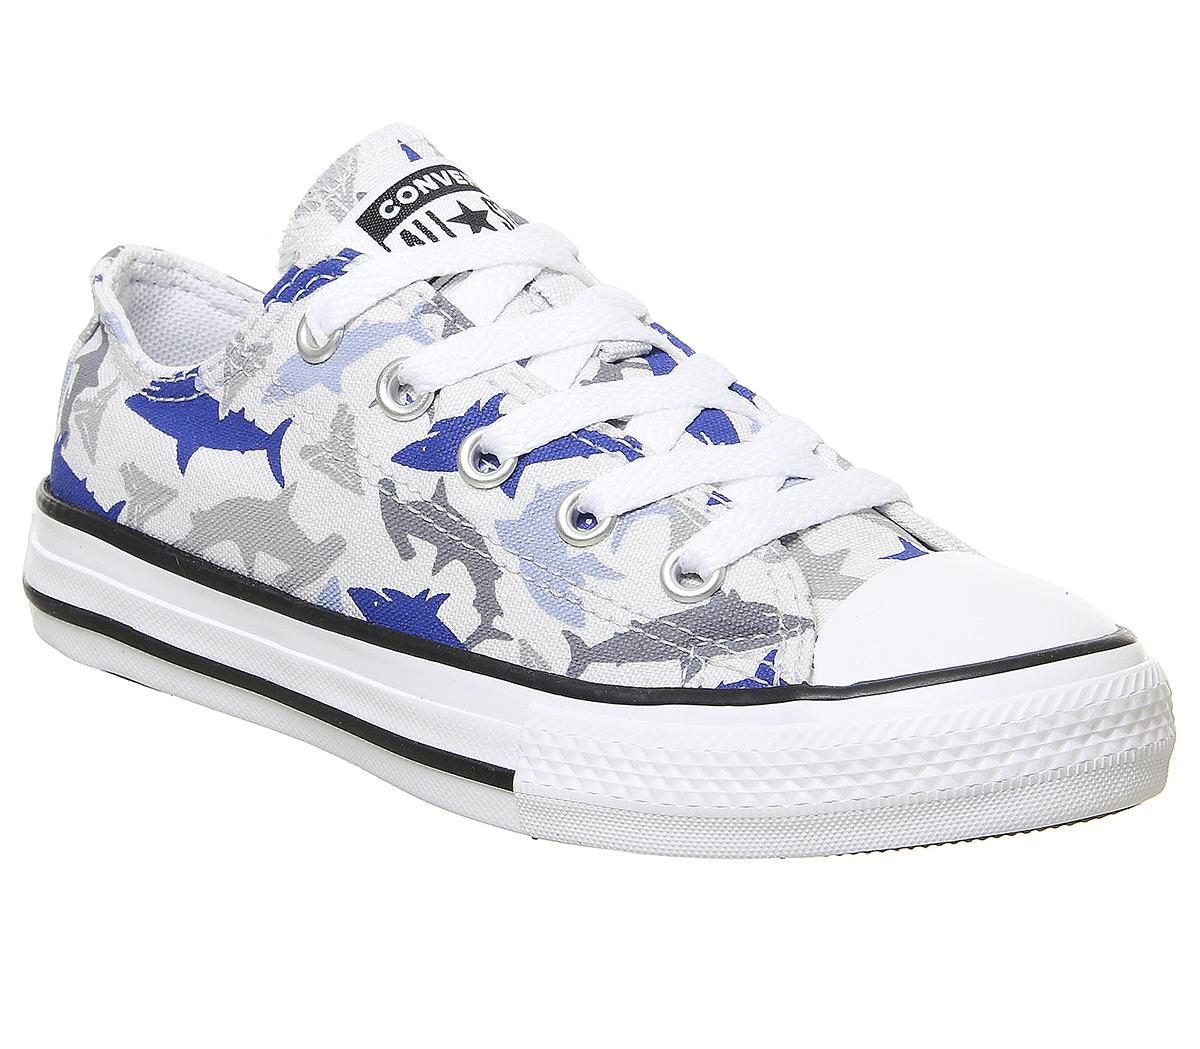 ConverseAll Star Low Youth TrainersPhoton Dust Rush Blue White Shark